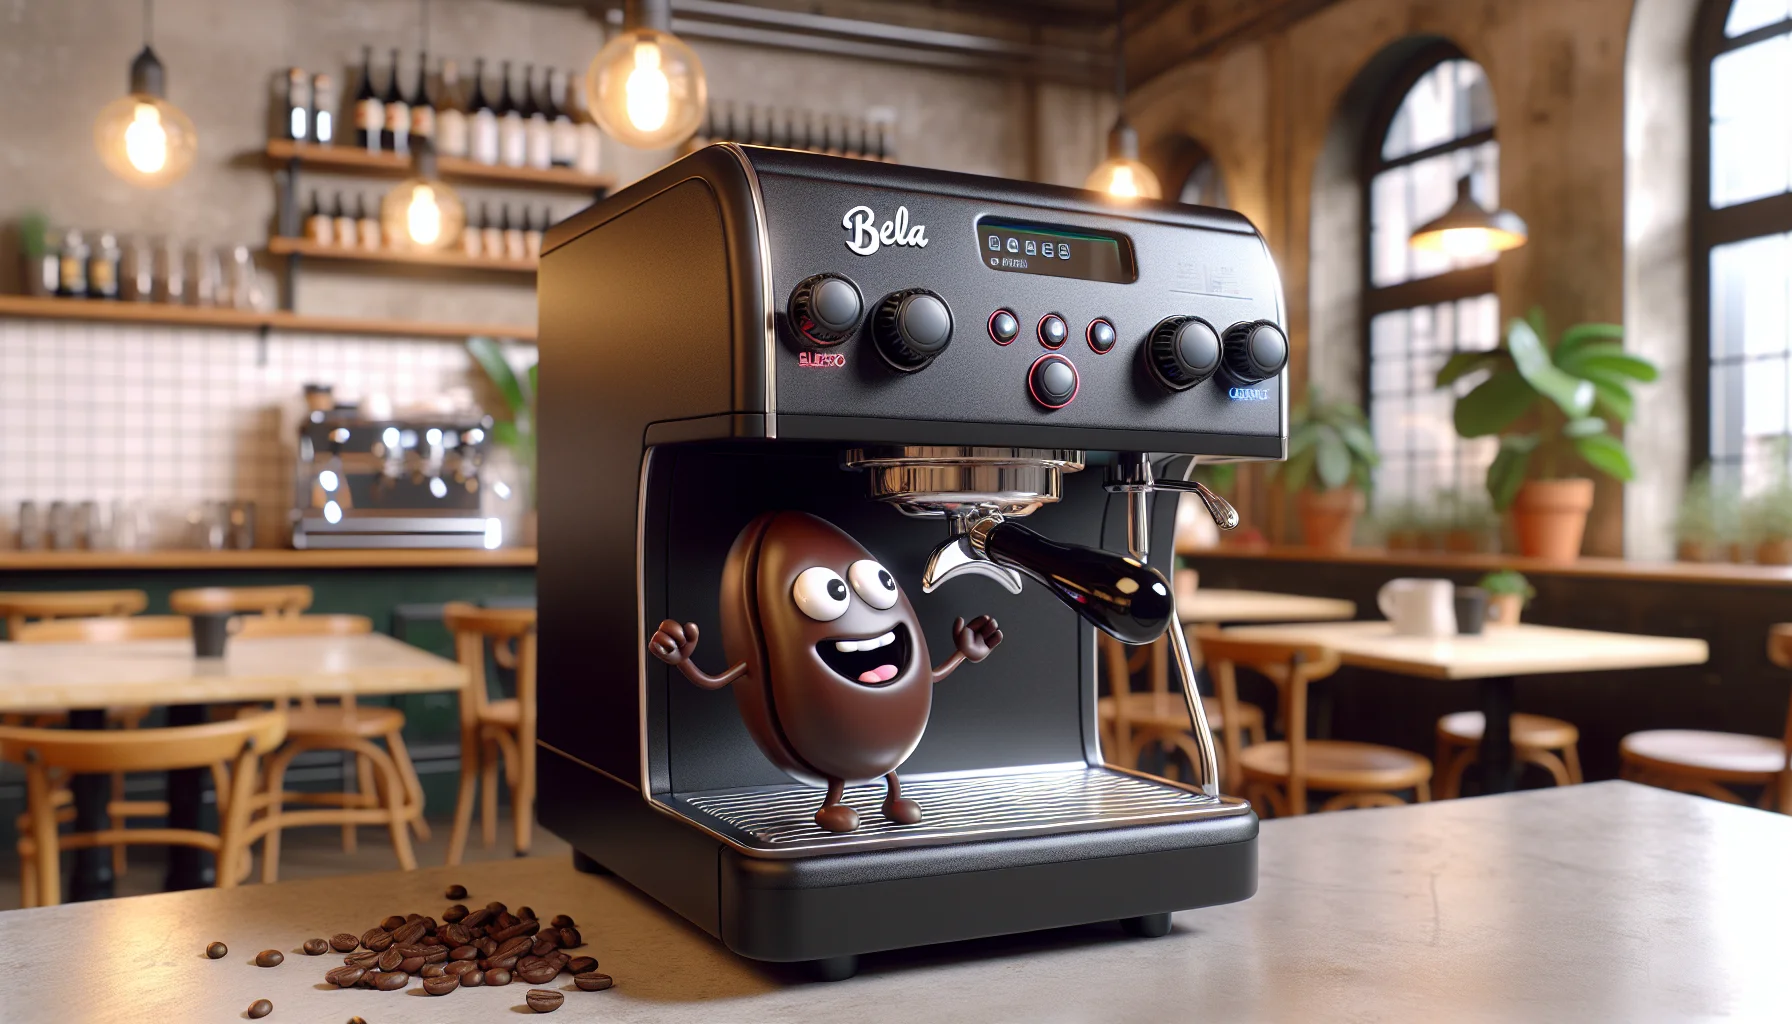 Create an image of a generic modern black espresso machine similar in style to the Bella Pro Series. The espresso machine is set in a whimsical scene in a bustling café. A 3D cartoon version of an espresso bean -with googly eyes, arms and legs- is grinning, pulling levers to operate the espresso machine, giving an expressive body language that hints it's having the time of its life. It's like it's saying 'Join the party, have an espresso!' This lighthearted scene encourages people to enjoy espresso in a playful manner.